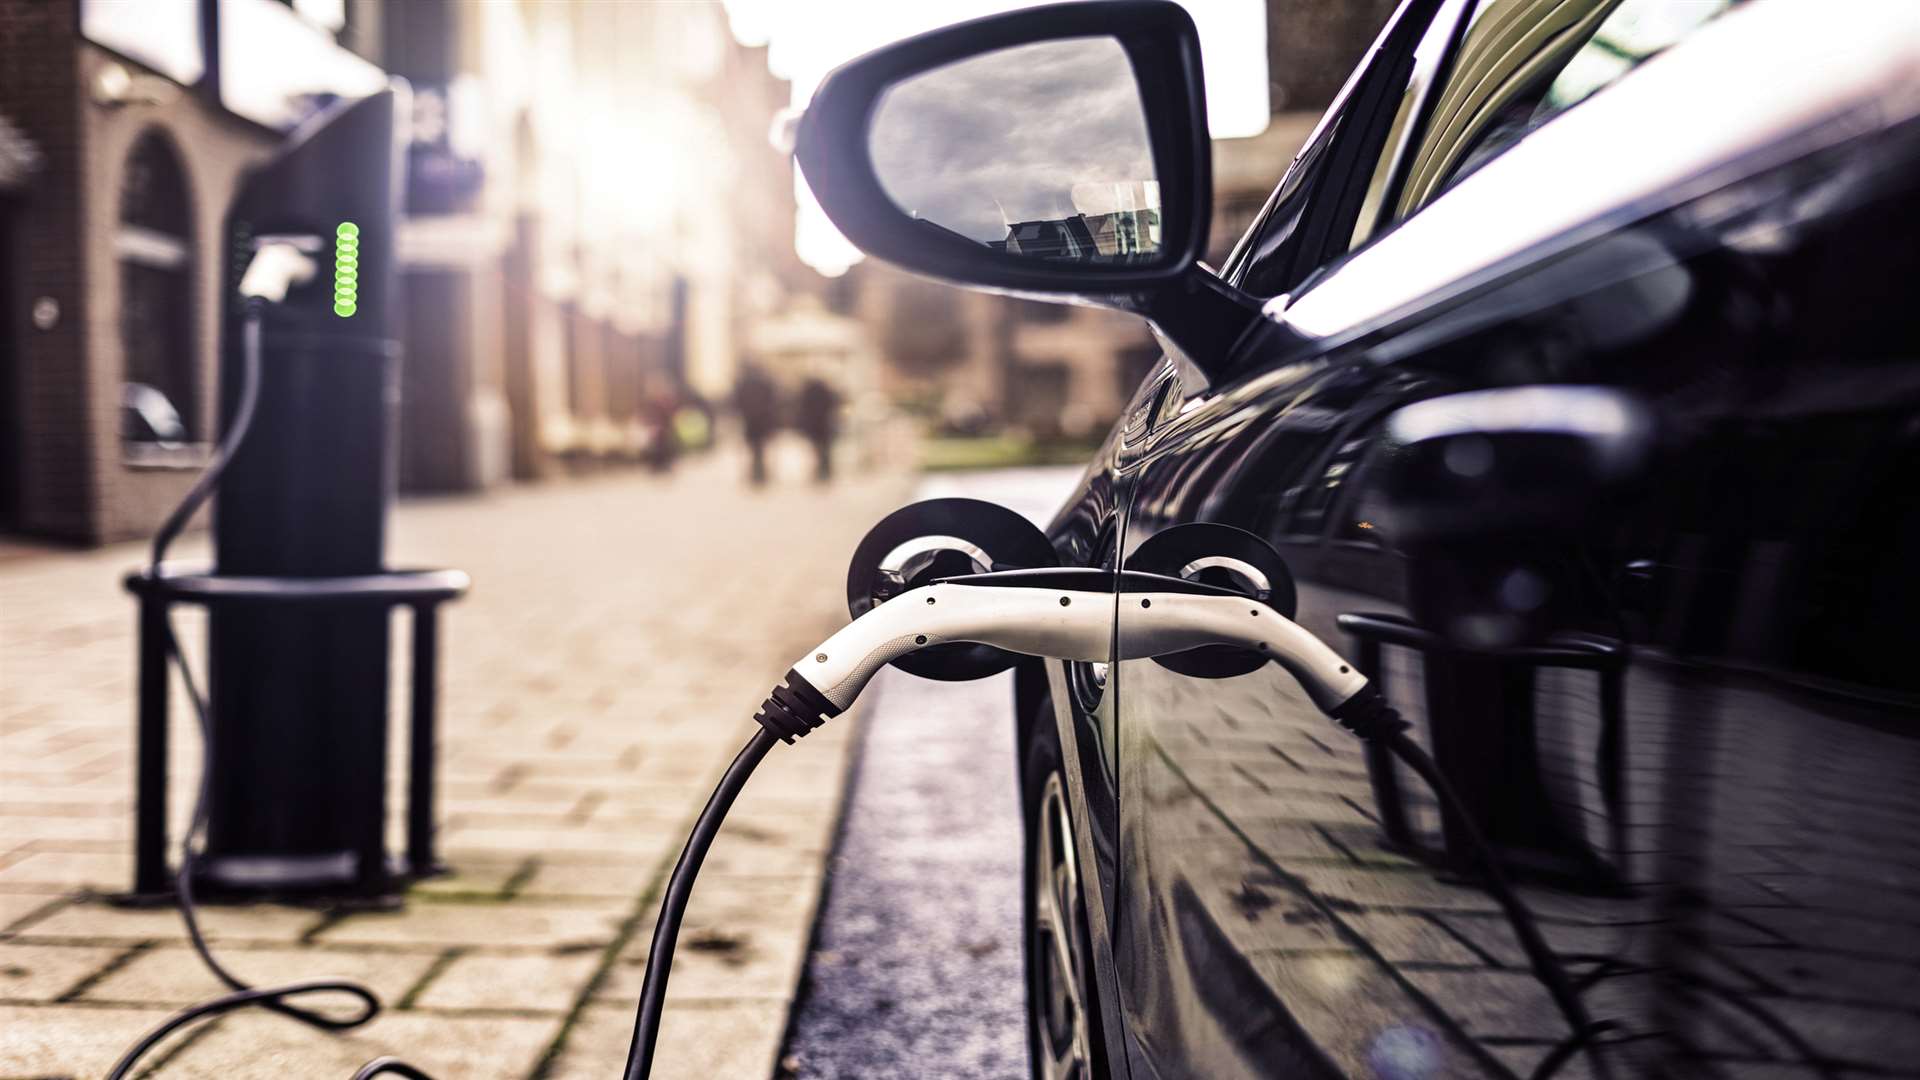 The number of electric cars are growing in Kent